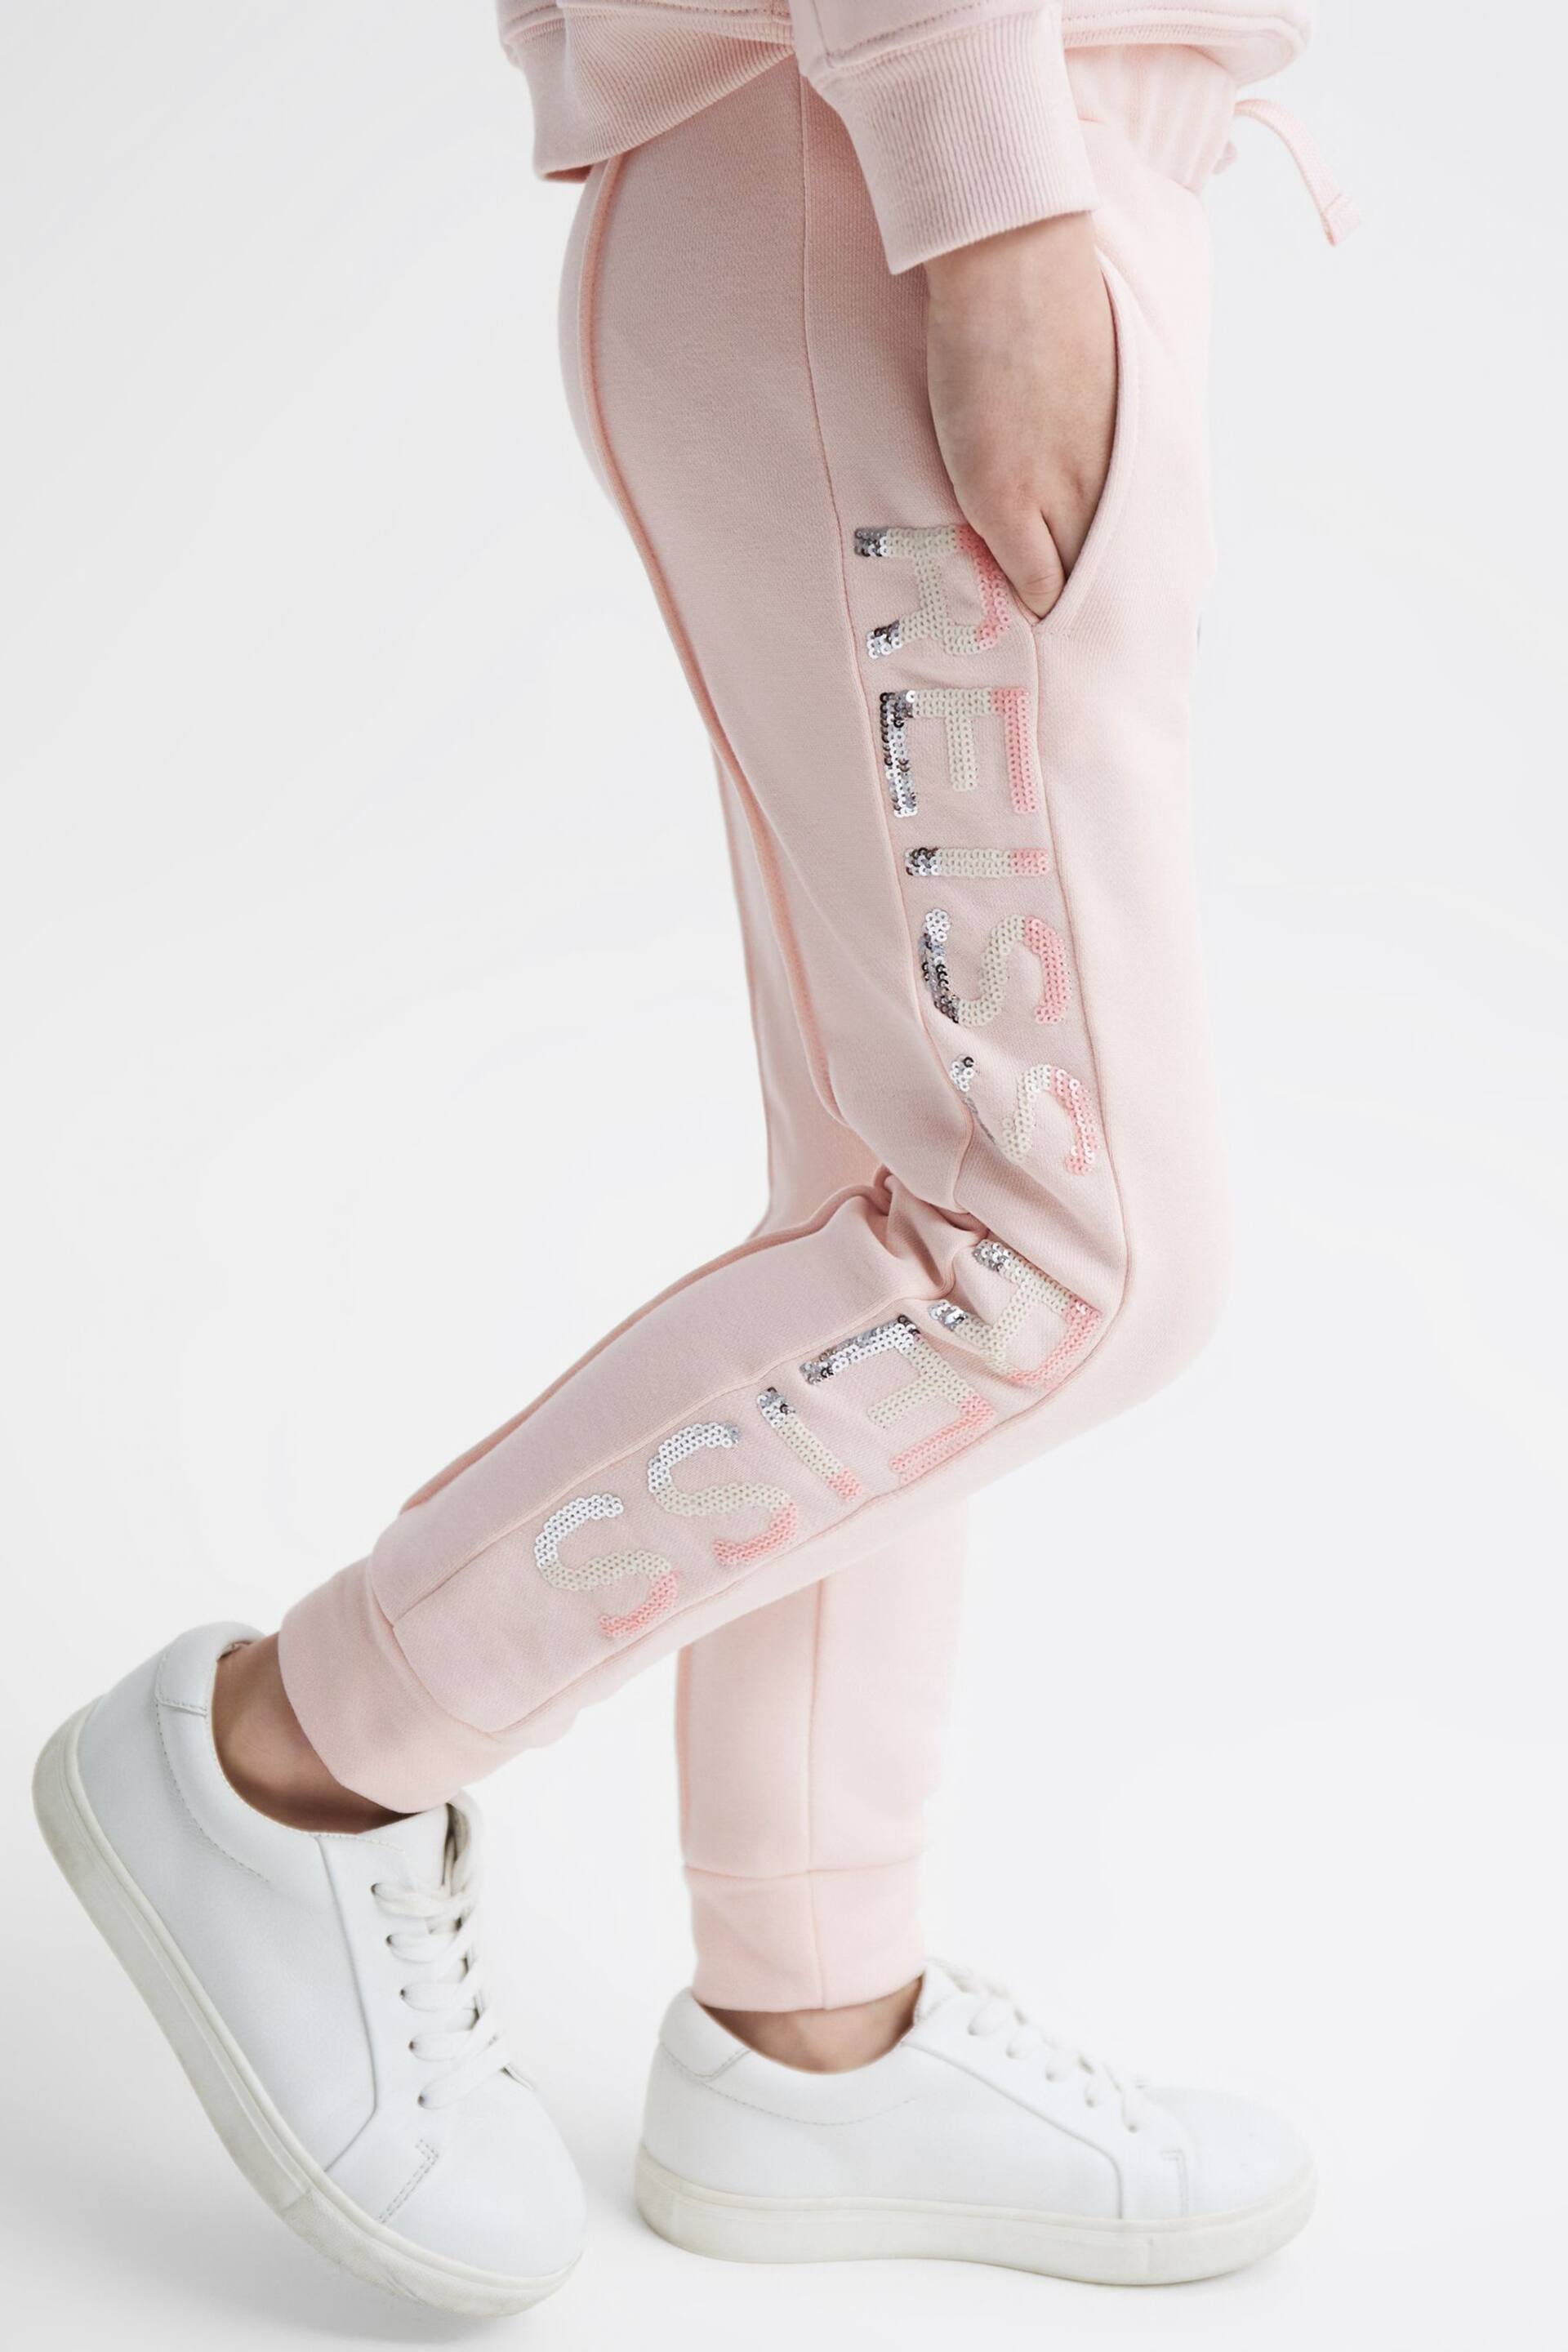 Reiss Soft Pink Maria Senior Sequin Joggers - Image 4 of 6